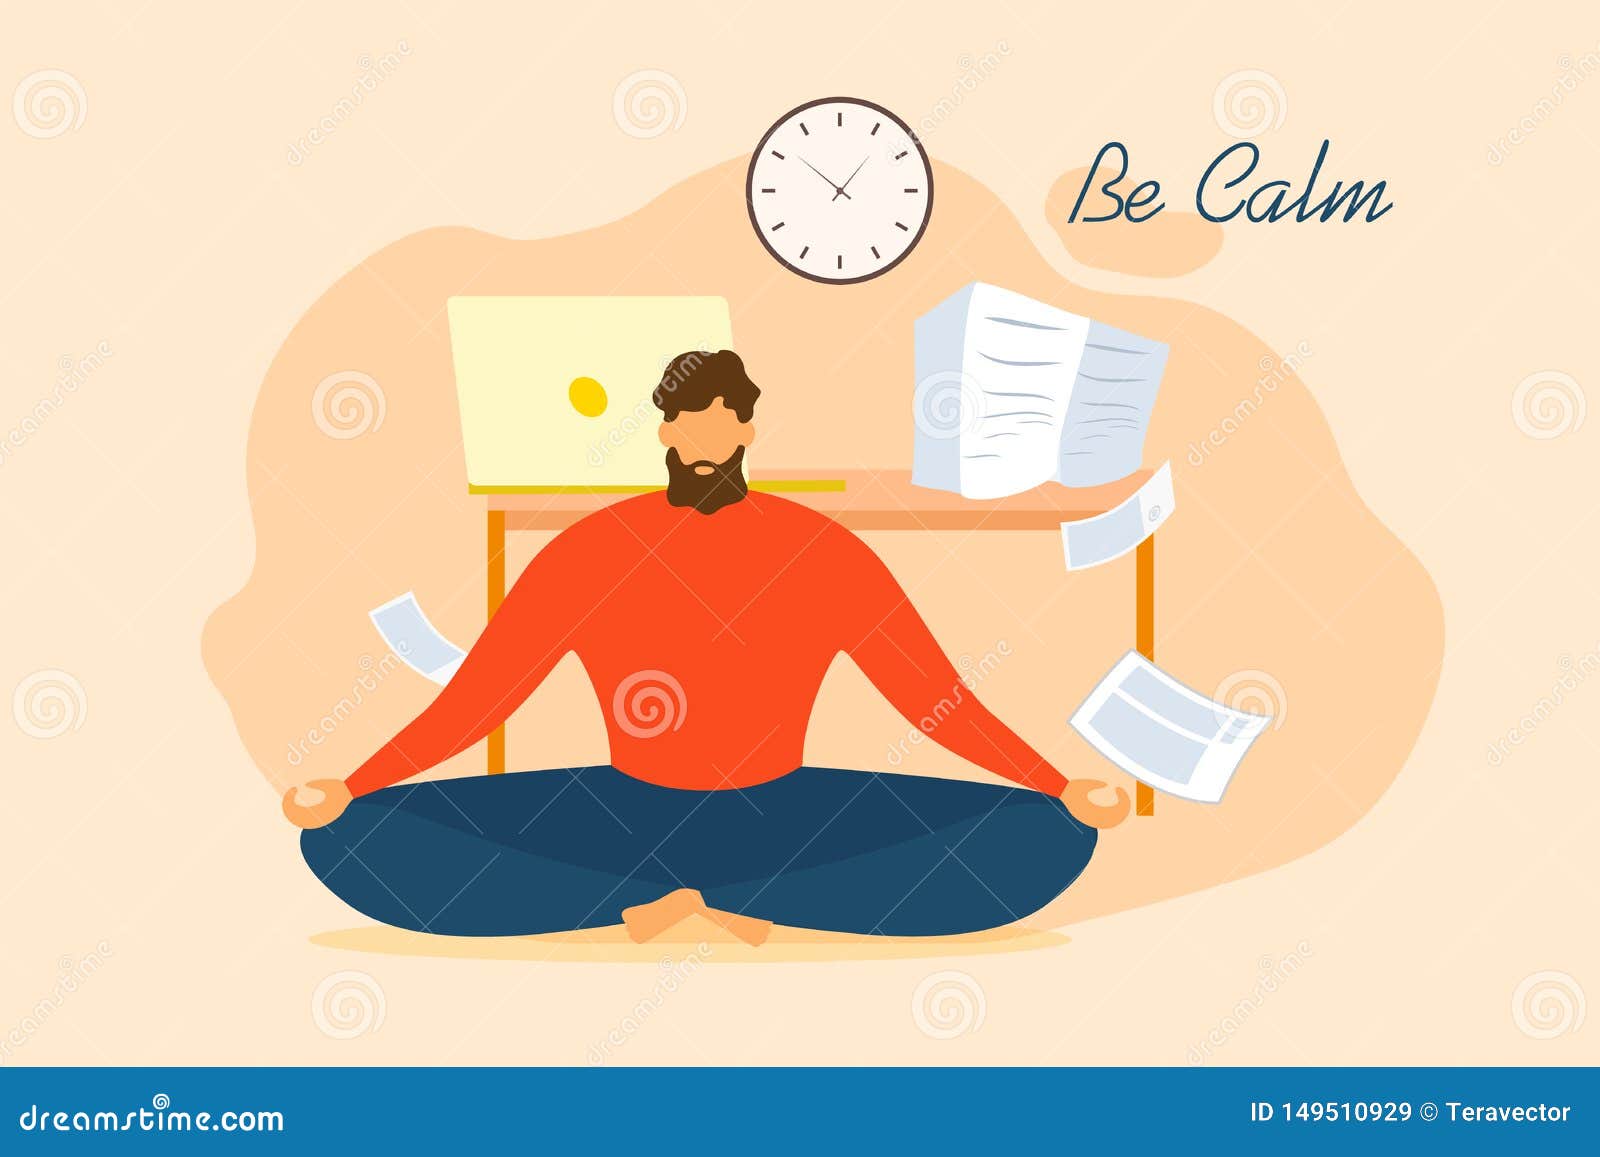 Cartoon Man Be Calm Meditate Office Stress Relief Stock Vector -  Illustration of emotional, page: 149510929